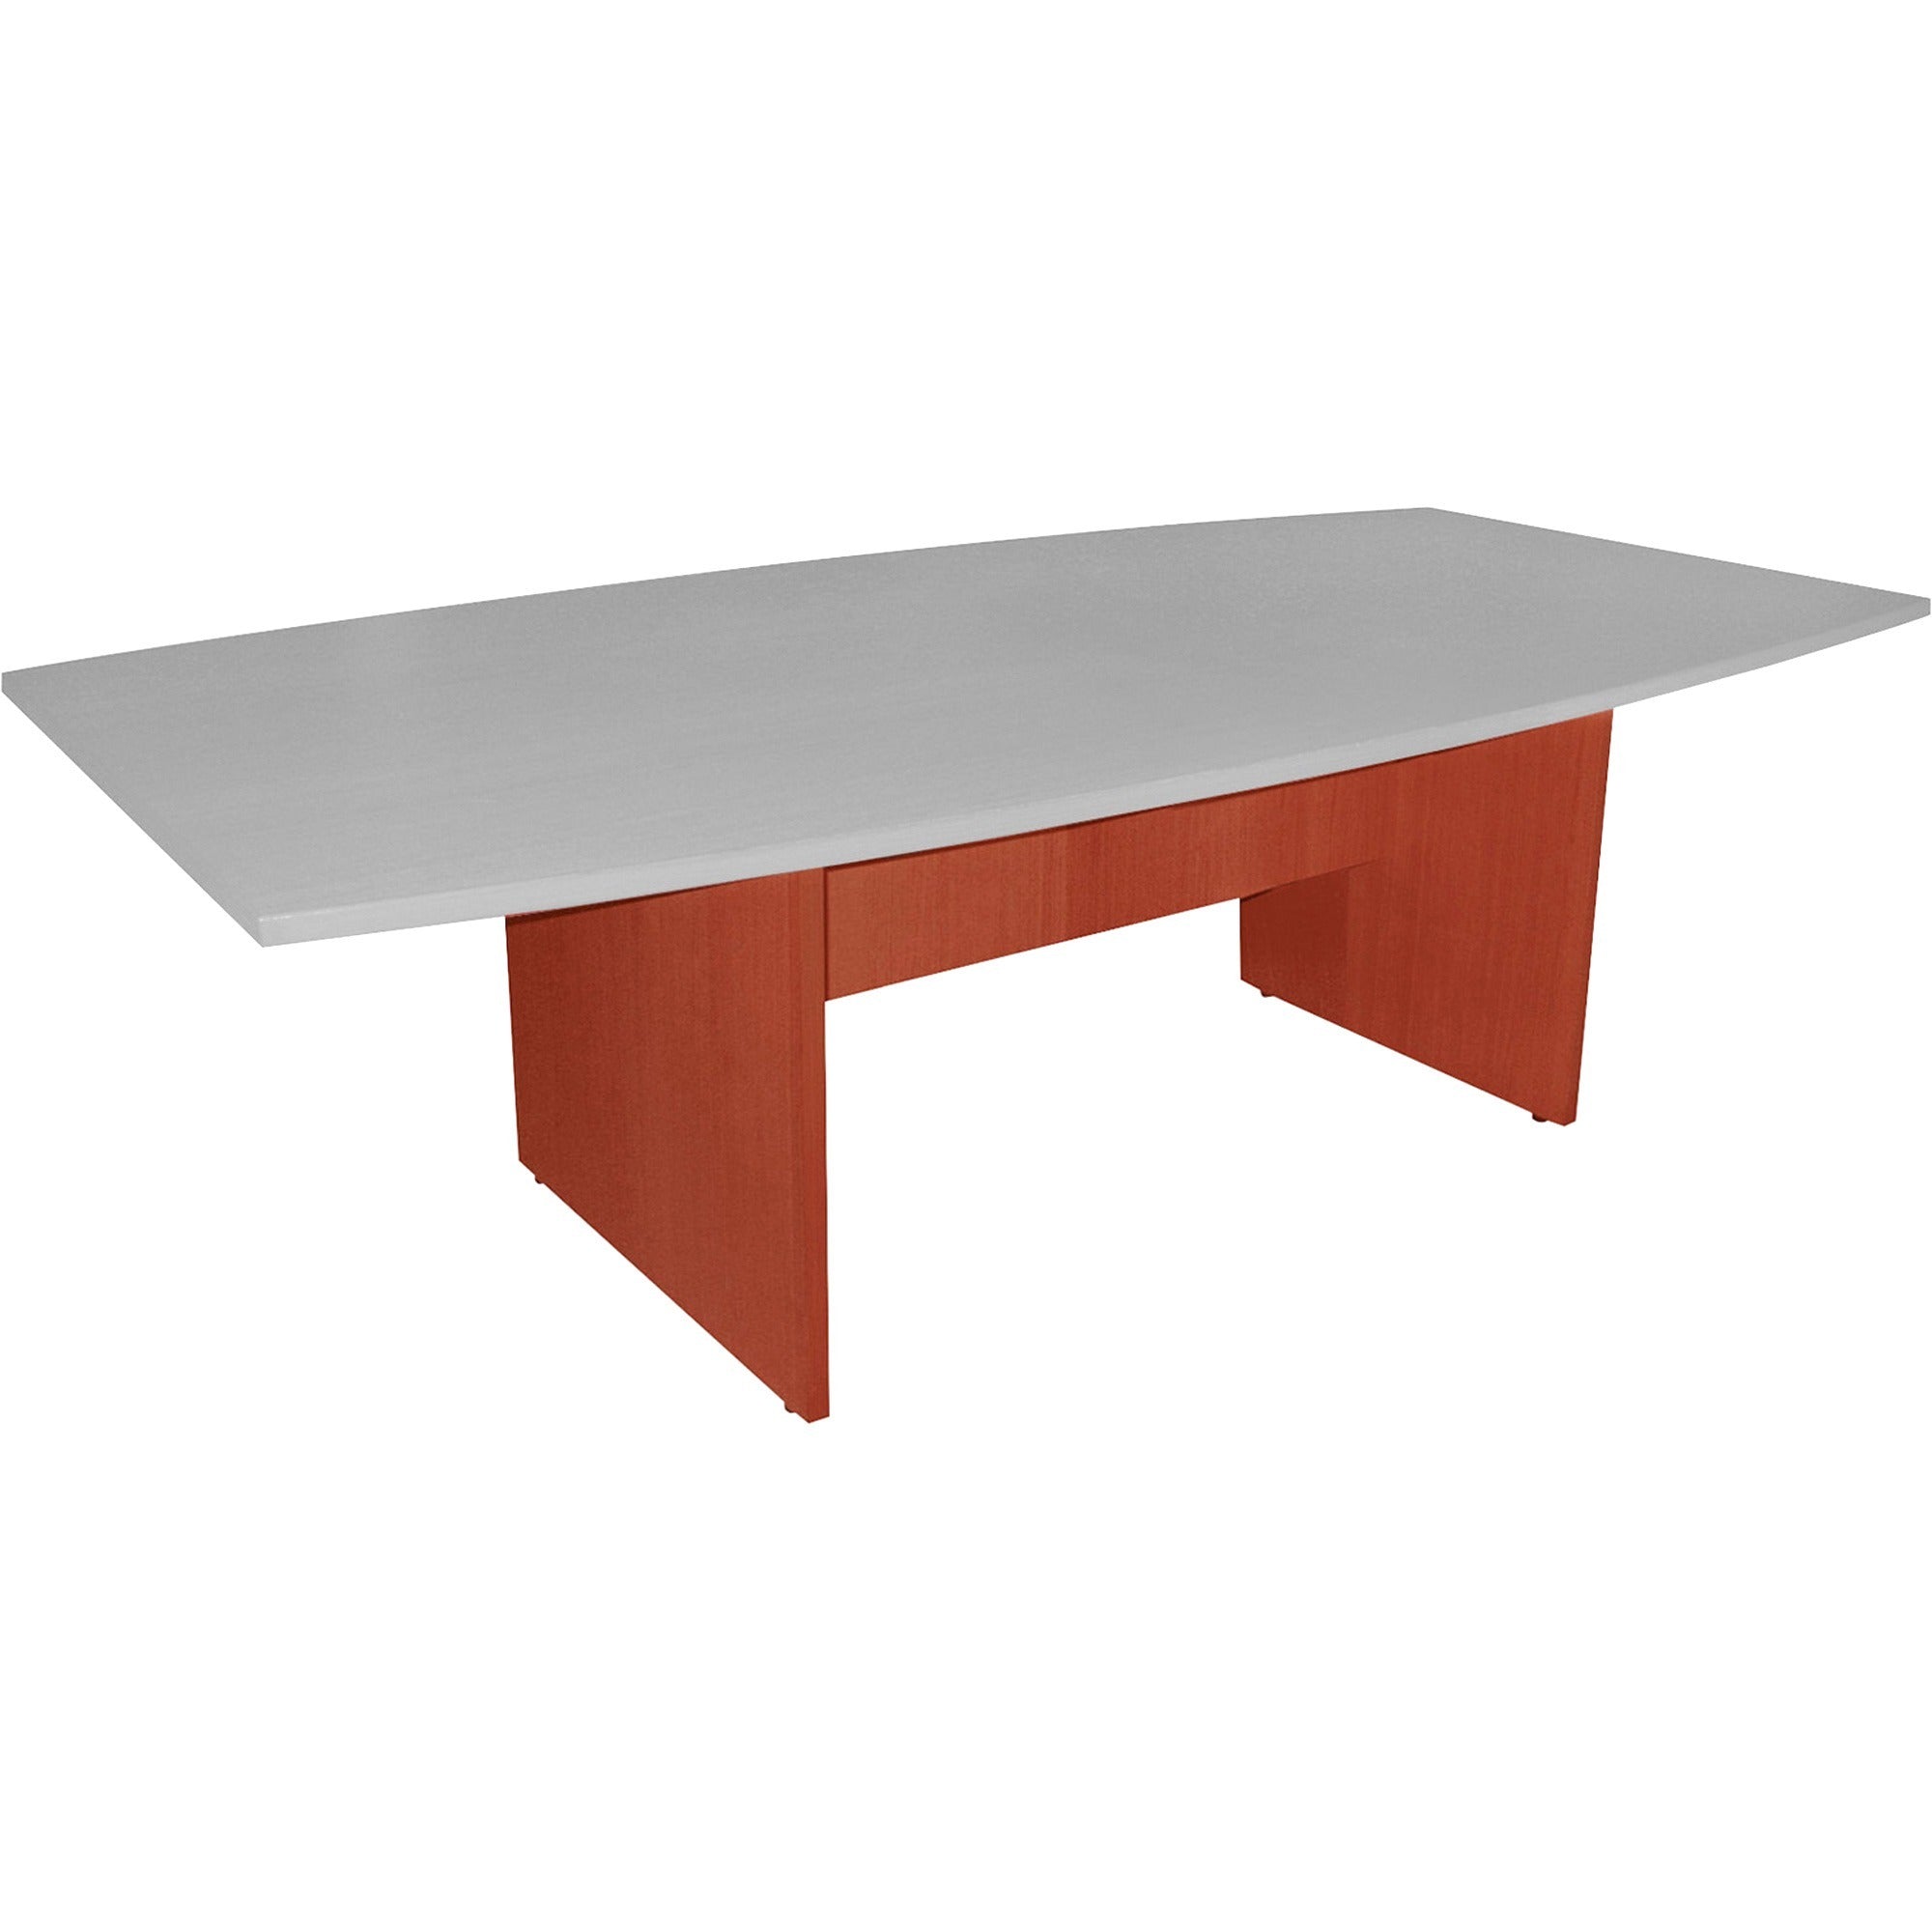 Lorell Essentials Conference Table Base (Box 2 of 2) - 2 Legs - 28.50" Height x 49.63" Width x 23.63" Depth - Assembly Required - Cherry, Laminated - 1 Each - 